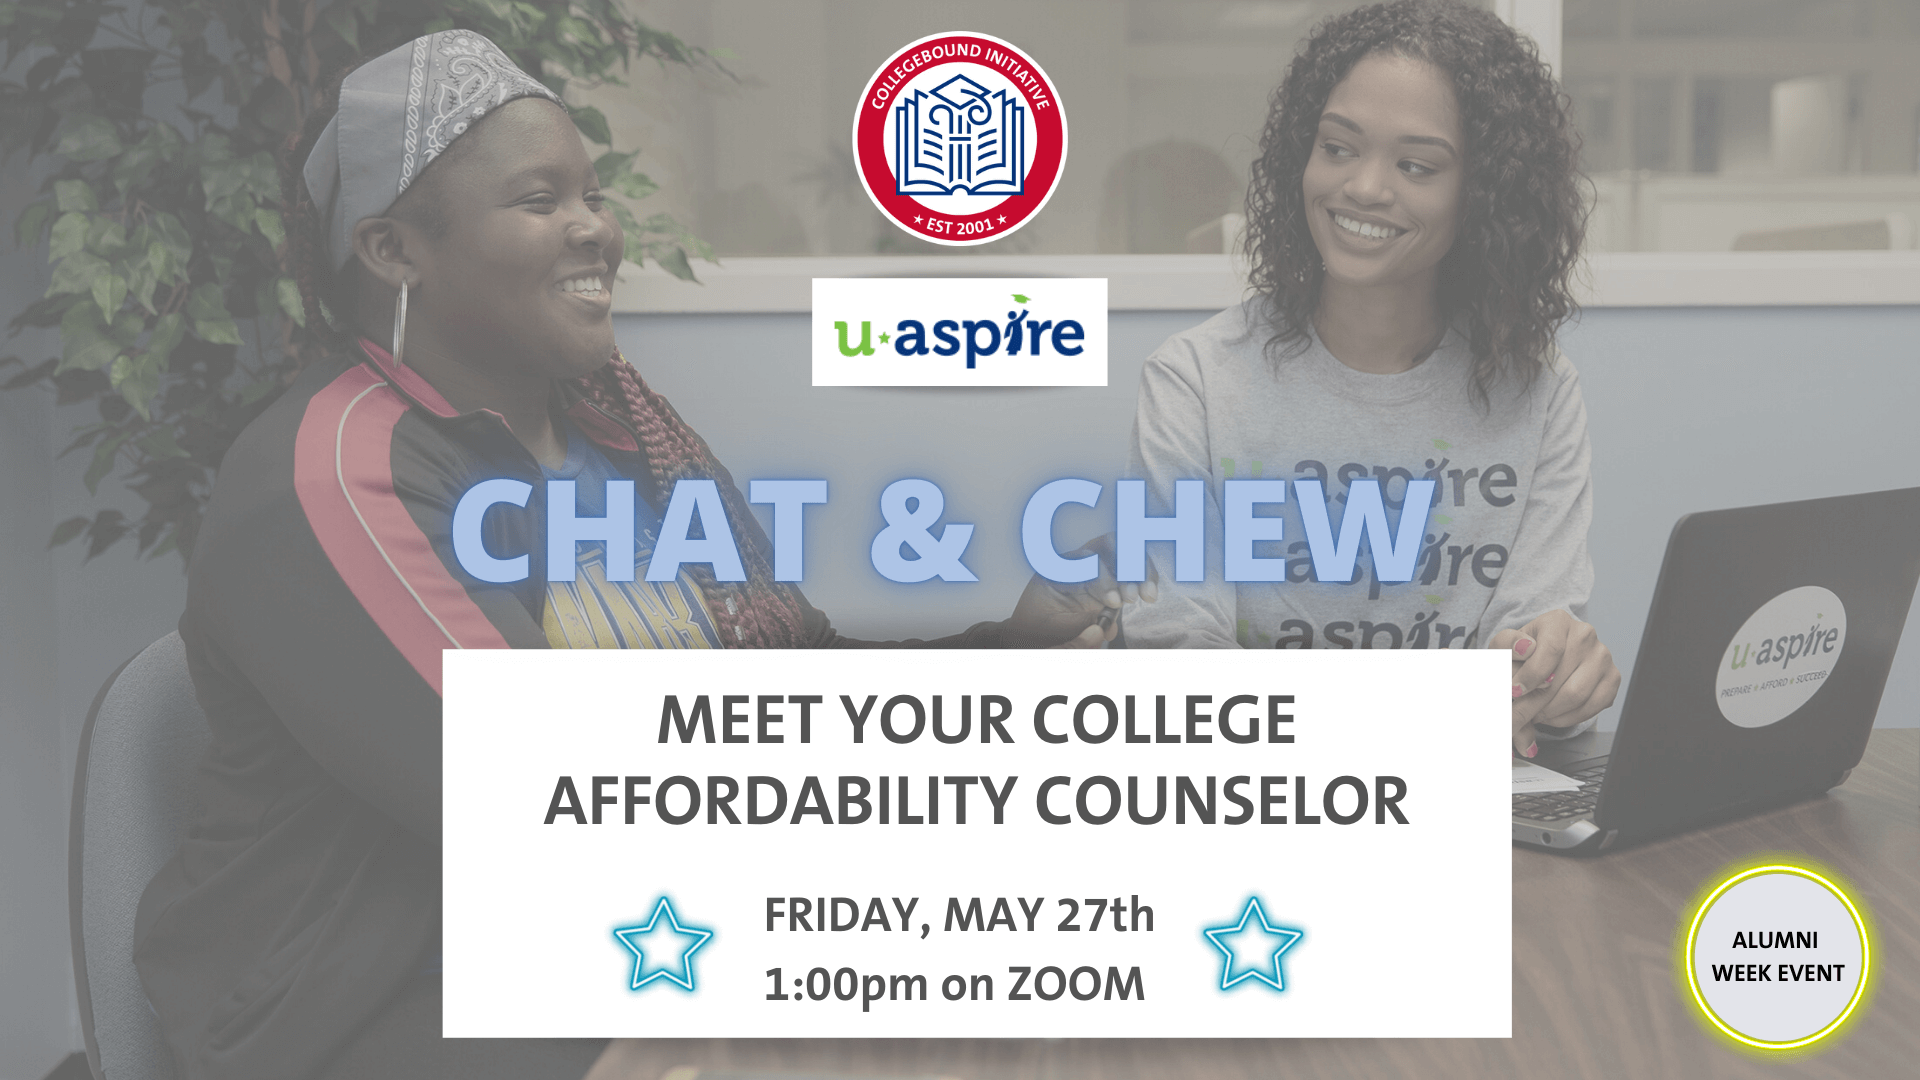 uAspire Chat and Chew on Friday, May 27 at 1pm on ZOOM.